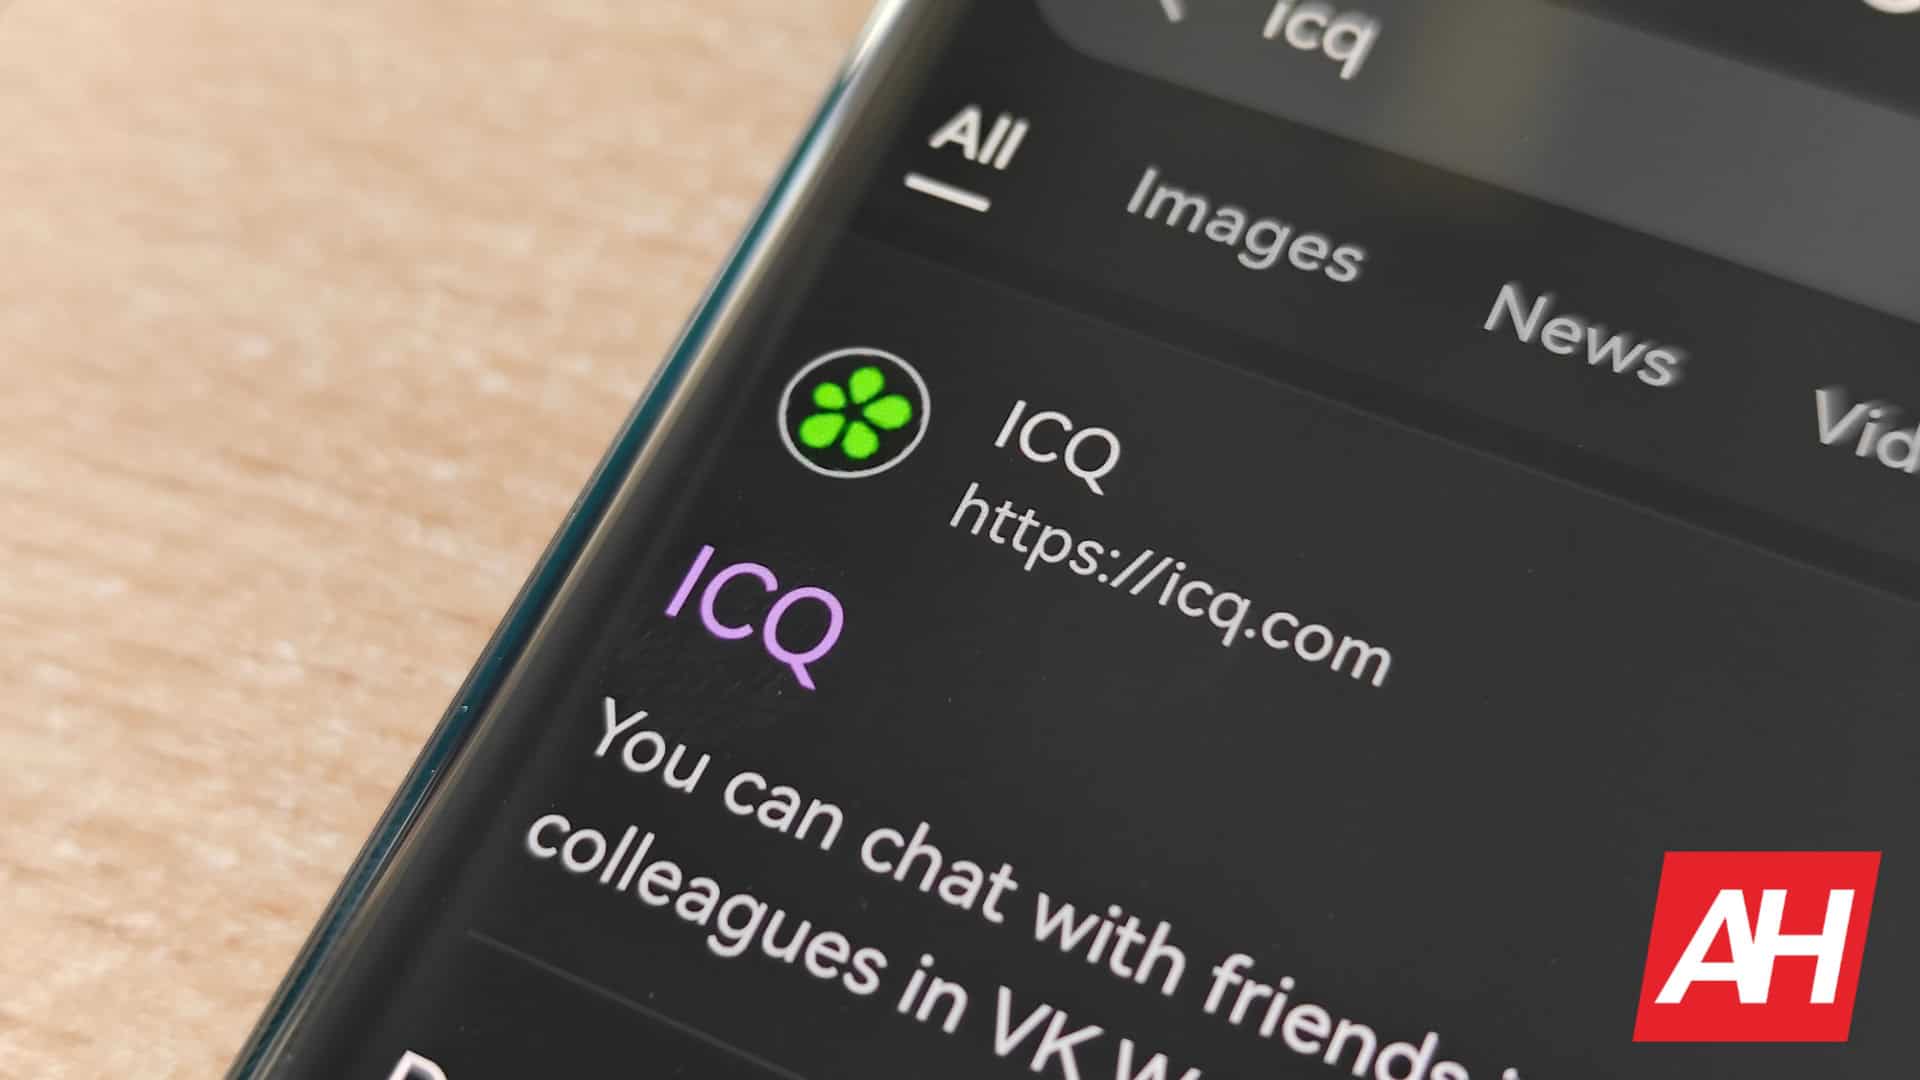 The ICQ messaging platform is saying goodbye after 28 years